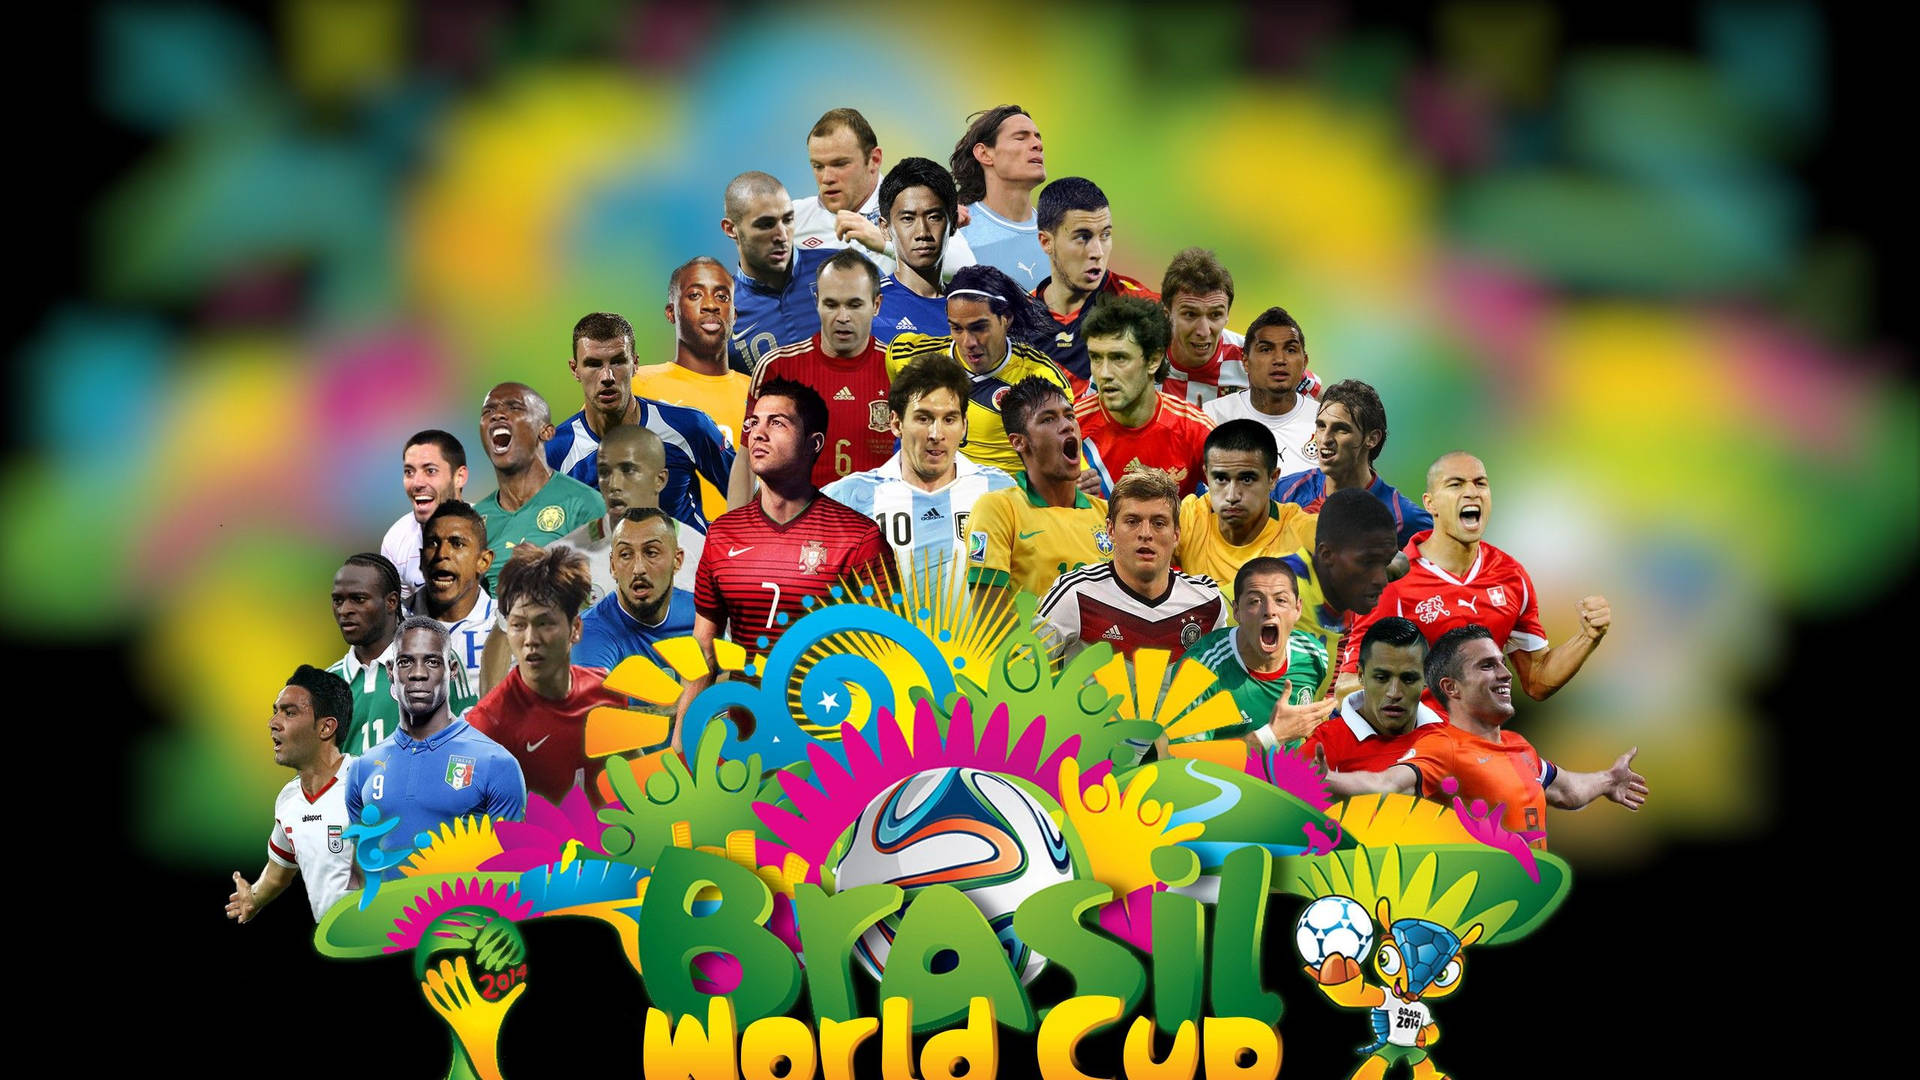 World Cup Pictures